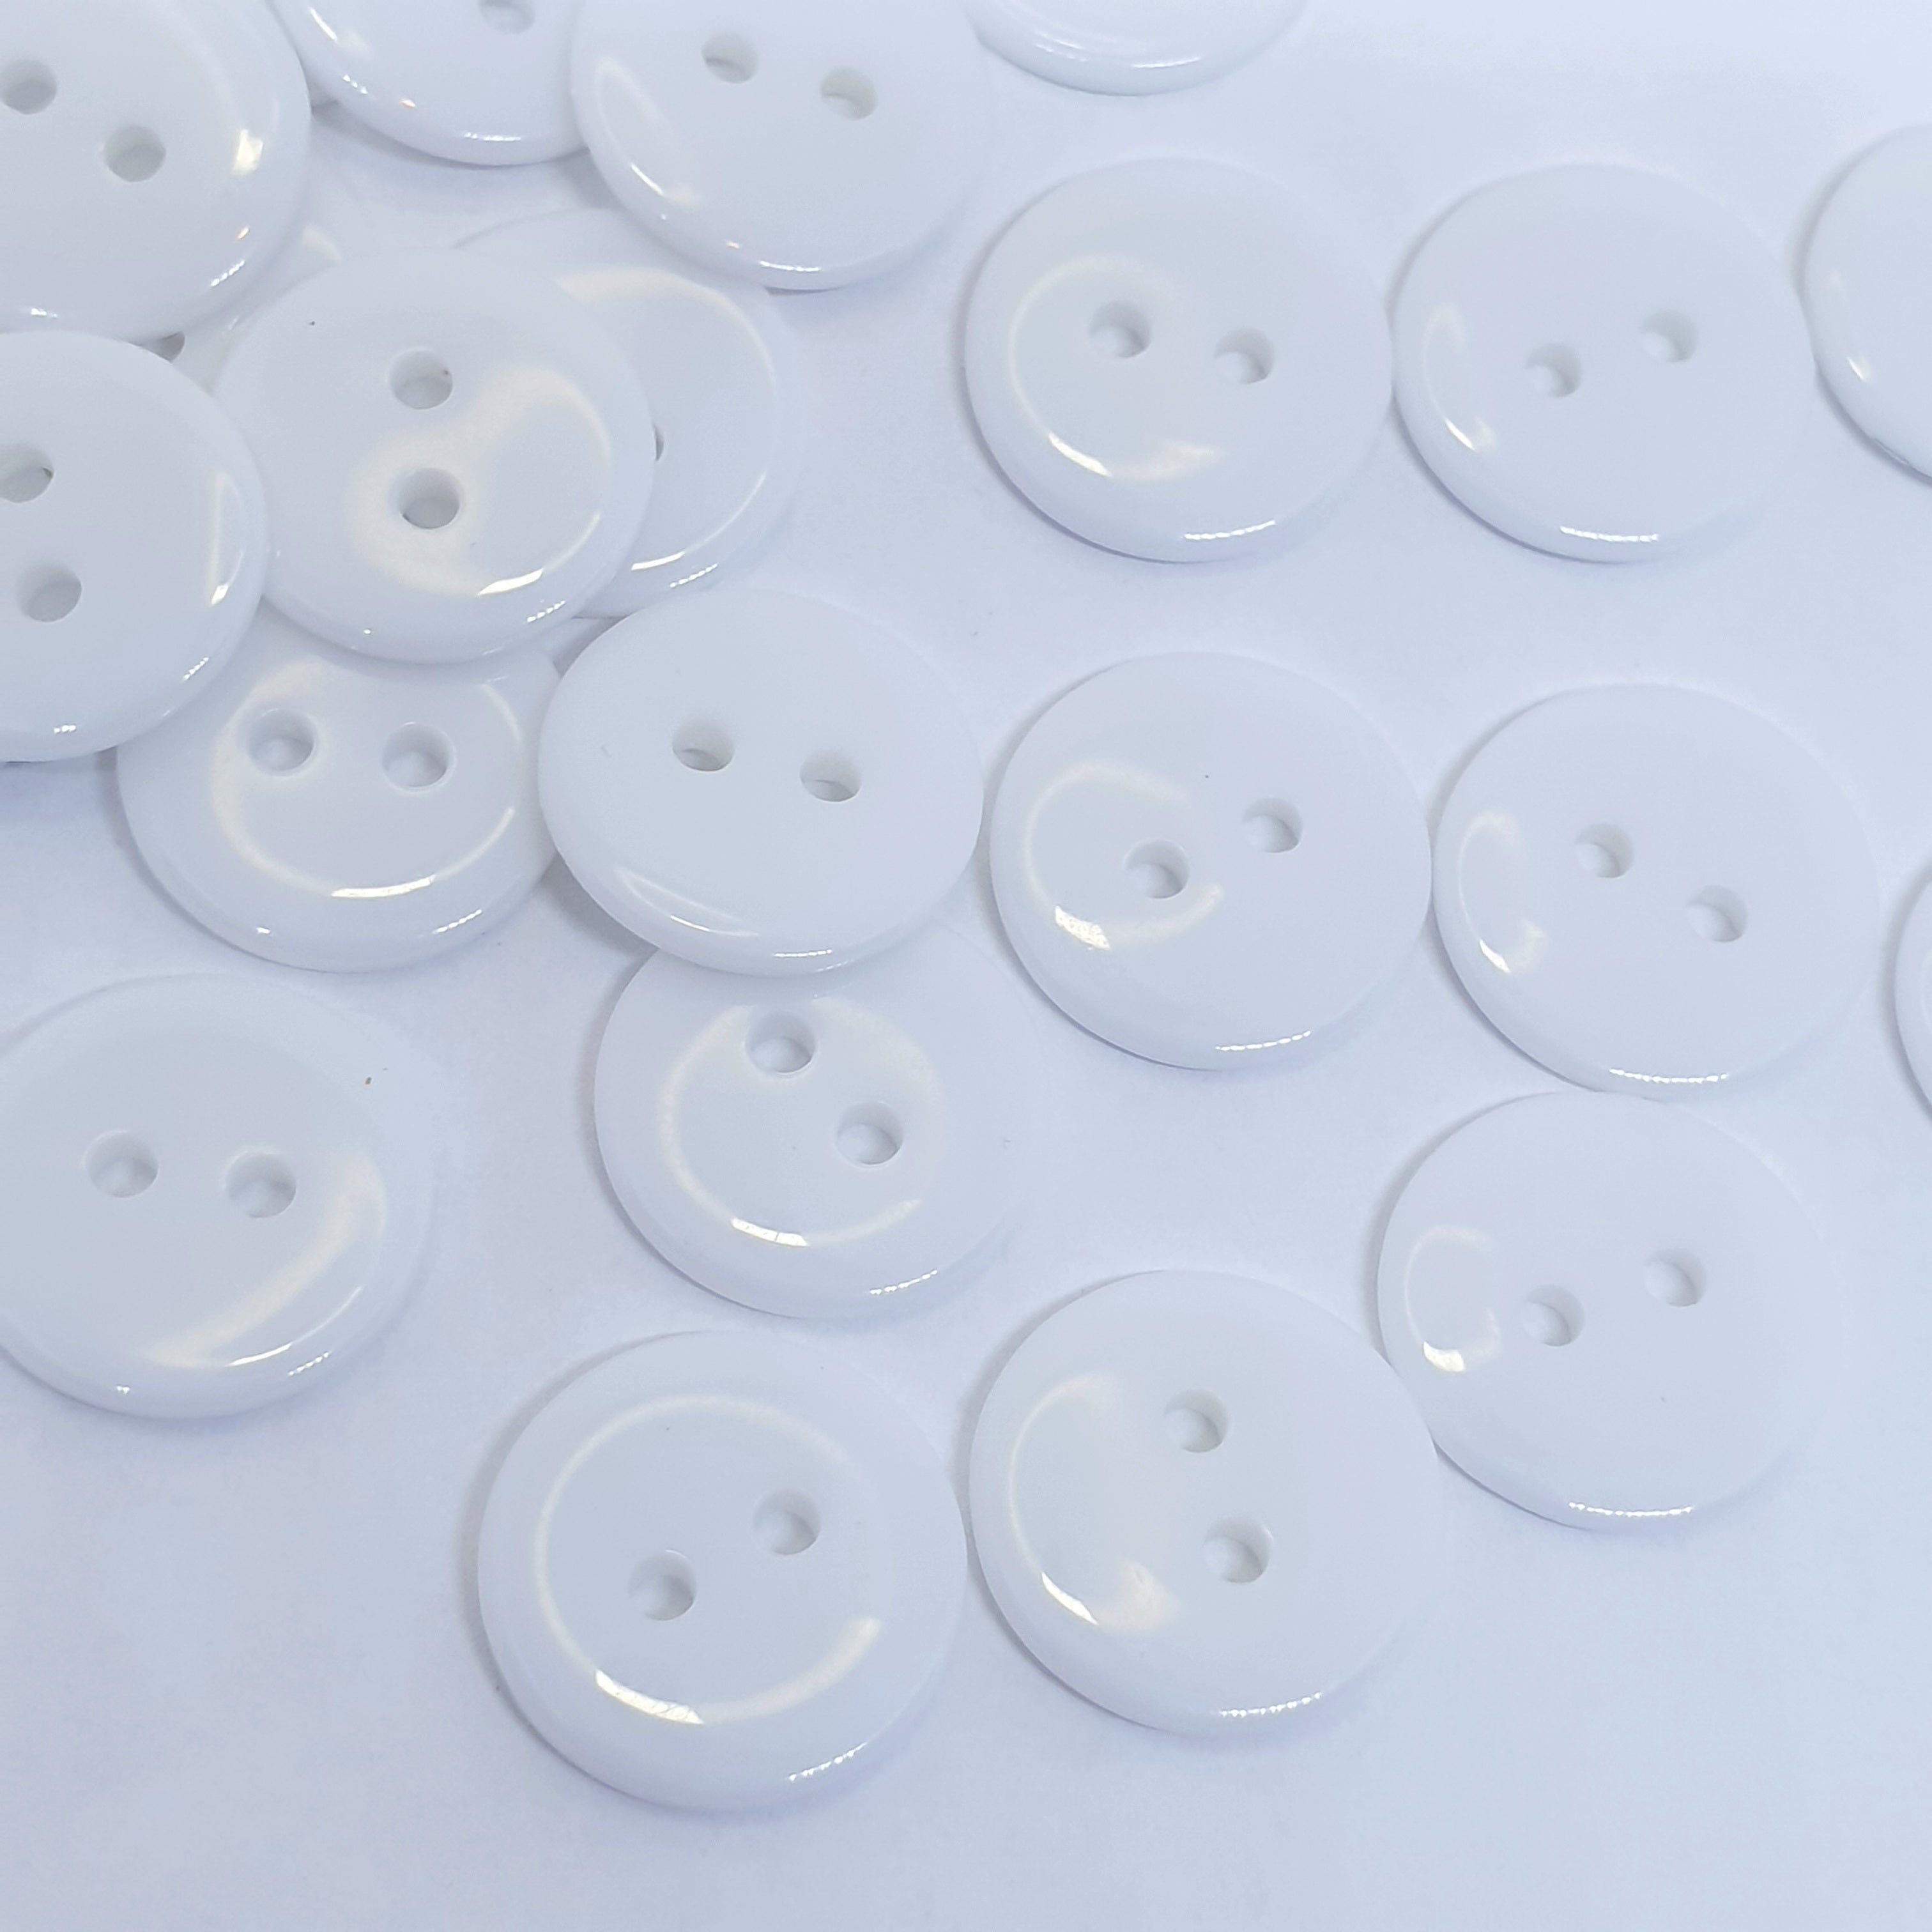 MajorCrafts 72pcs 15mm White 2 Holes Round Resin Sewing Buttons